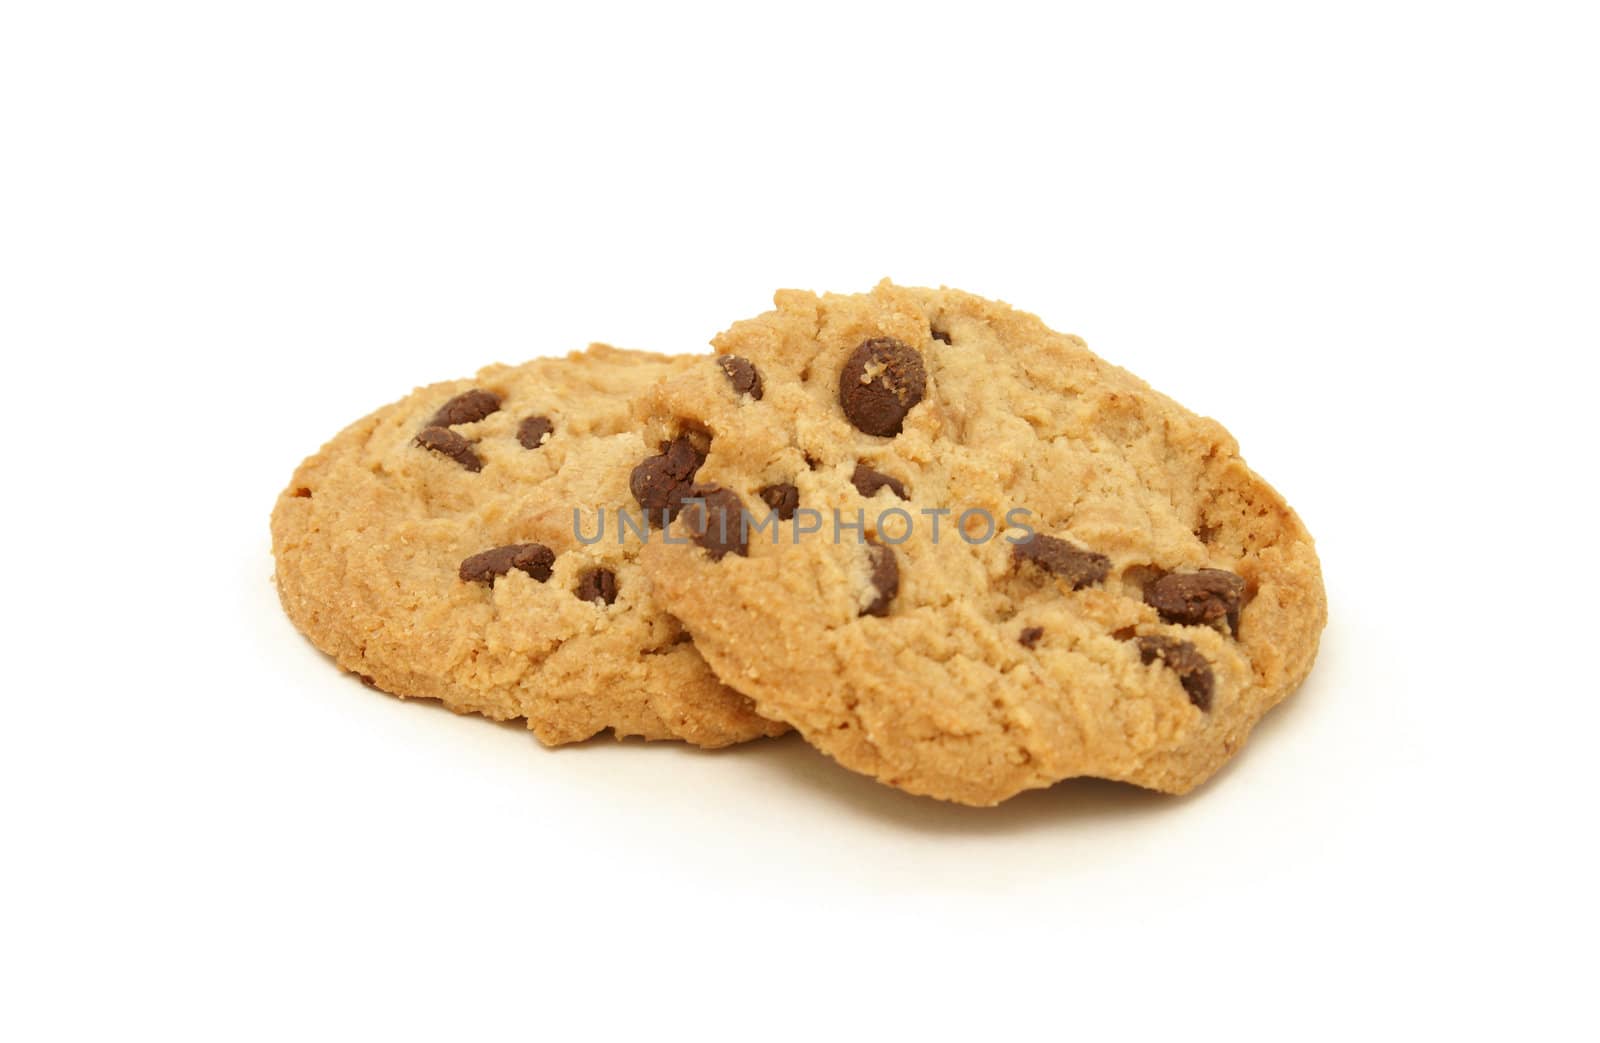 A couple of chocolate chip cookies isolated on white background.